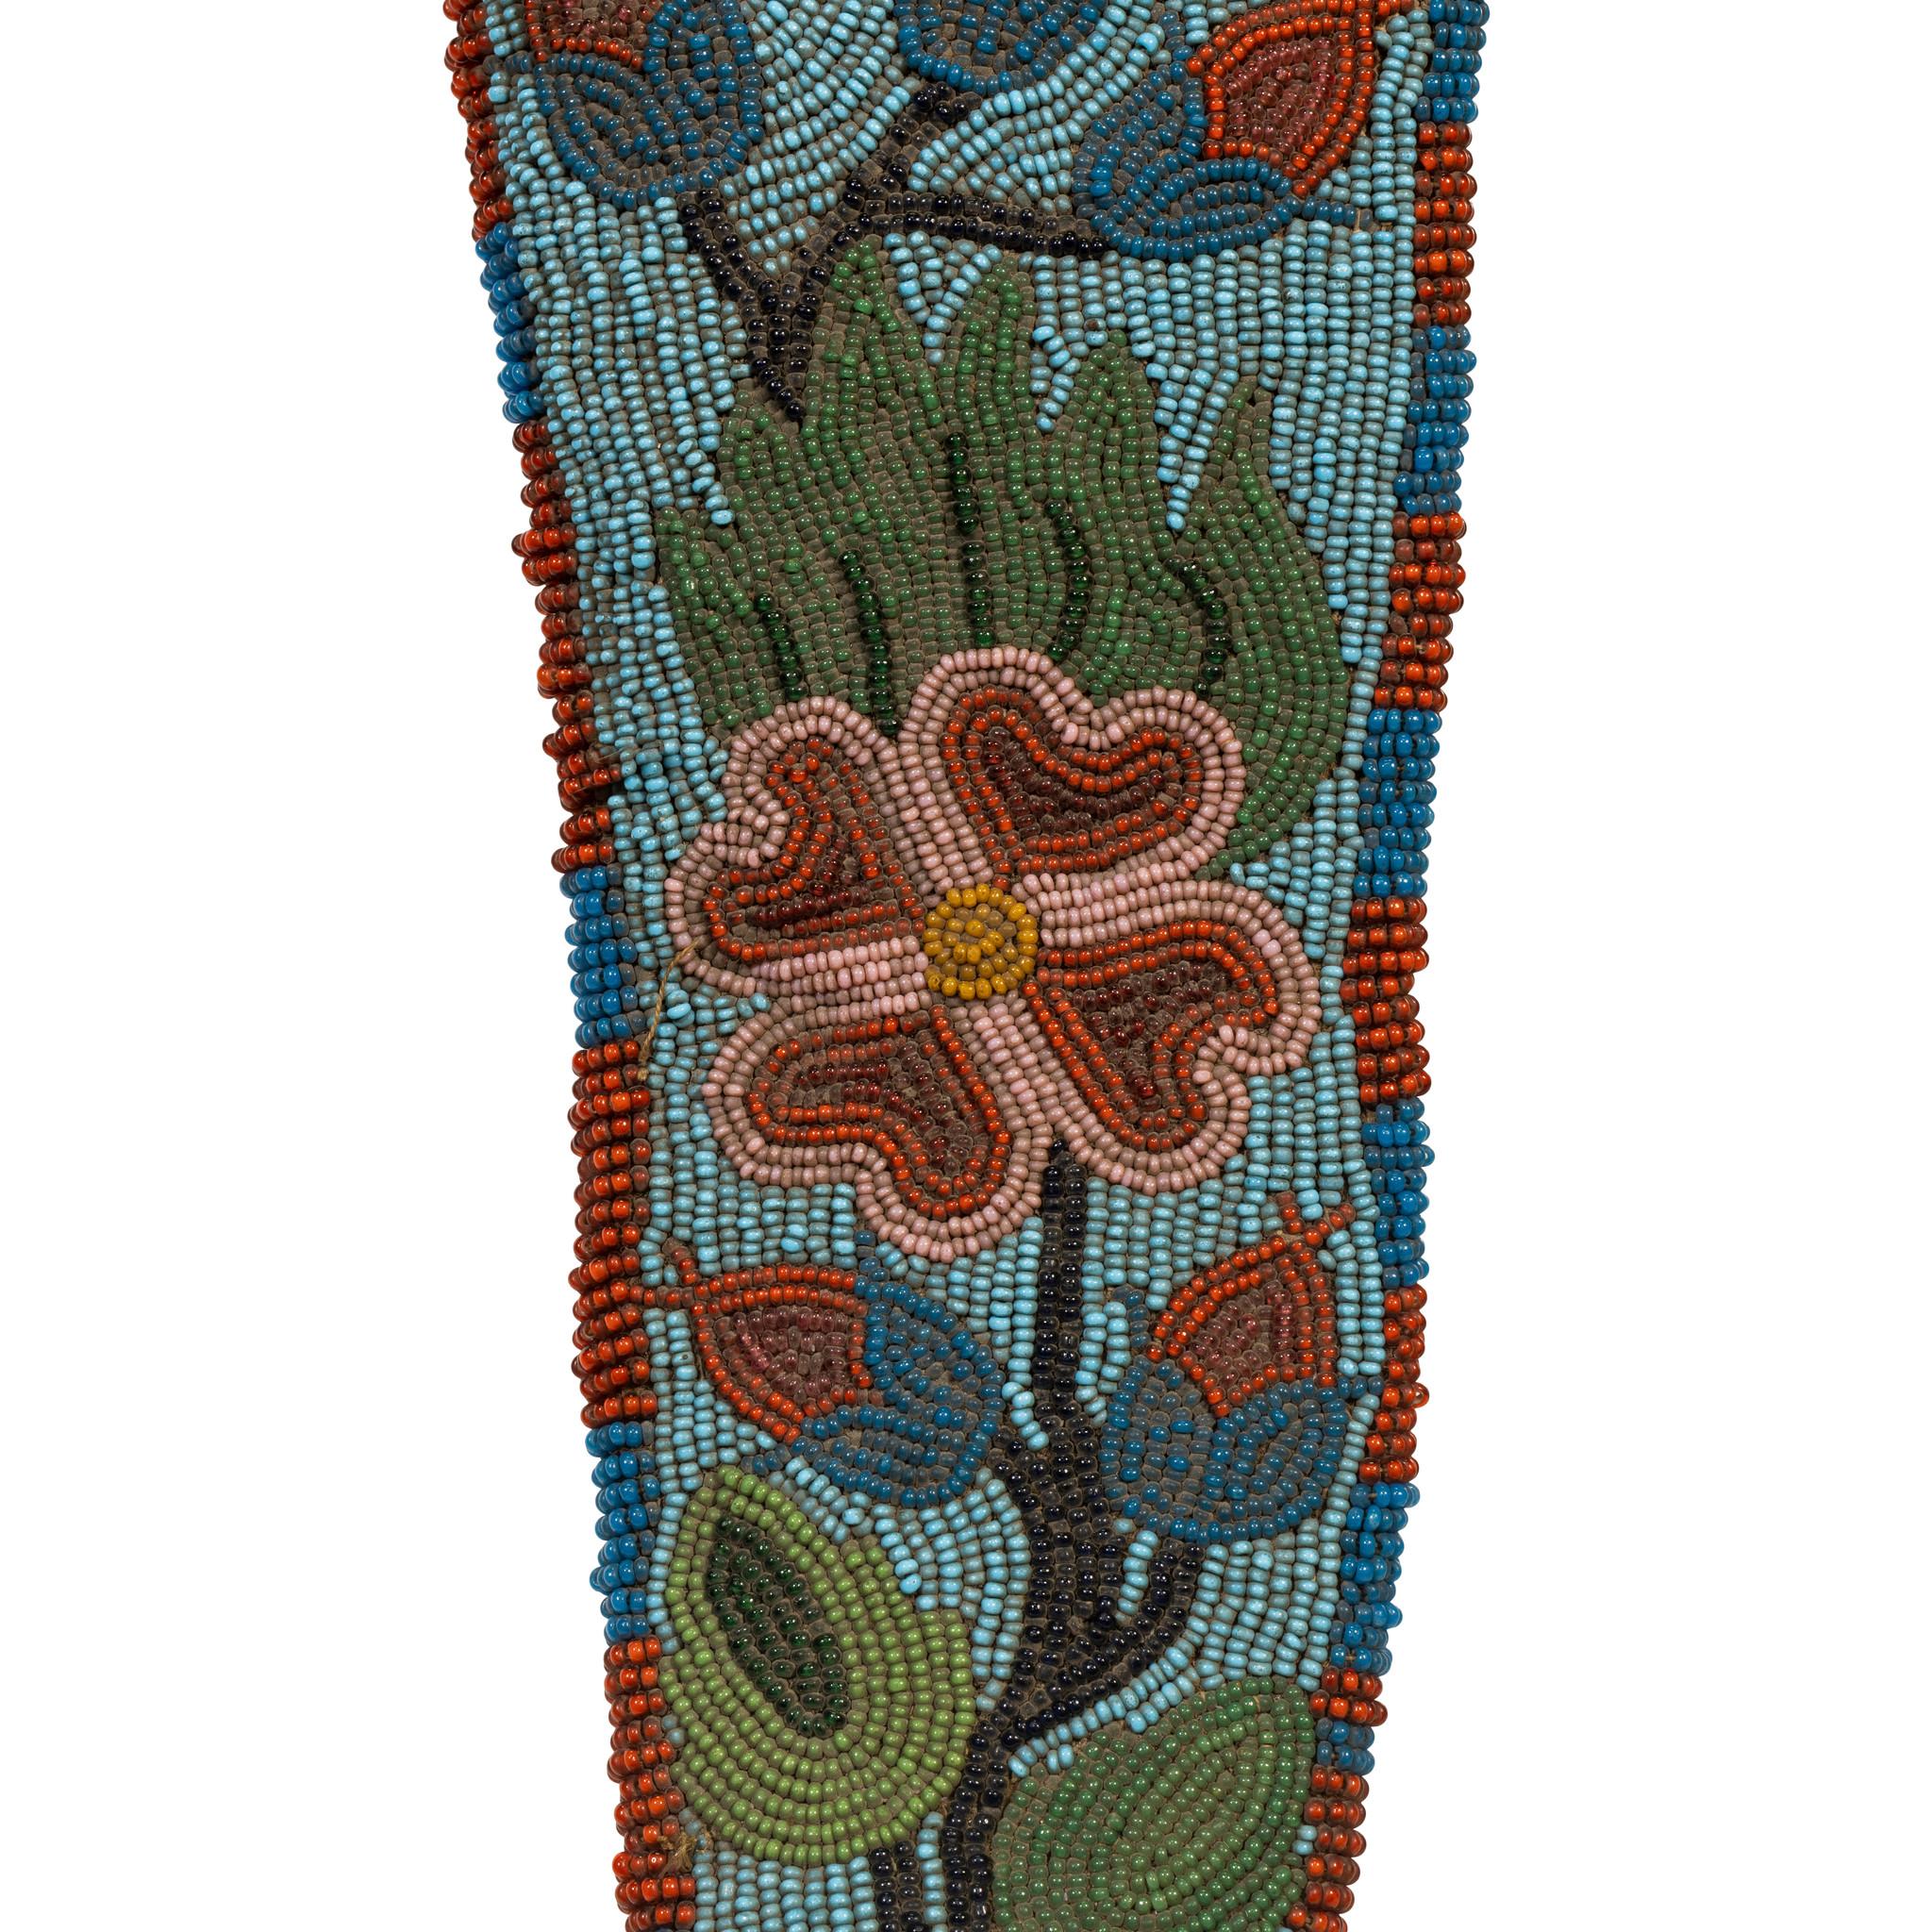 Nez Perce fully contour beaded holster. Blue background with Classic floral design on brain tanned buffalo.

Period: 19th century
Origin: Nez Perce
Size: 13